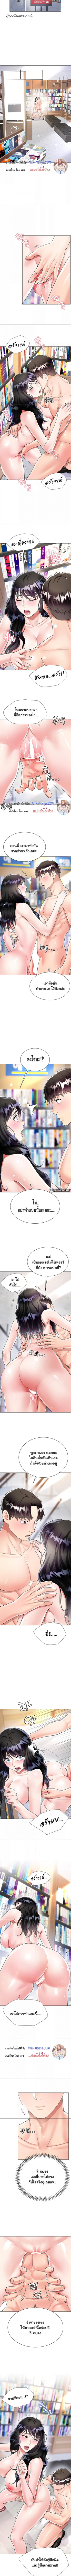 My Sister-in-law’s Skirt 11 ภาพที่ 5